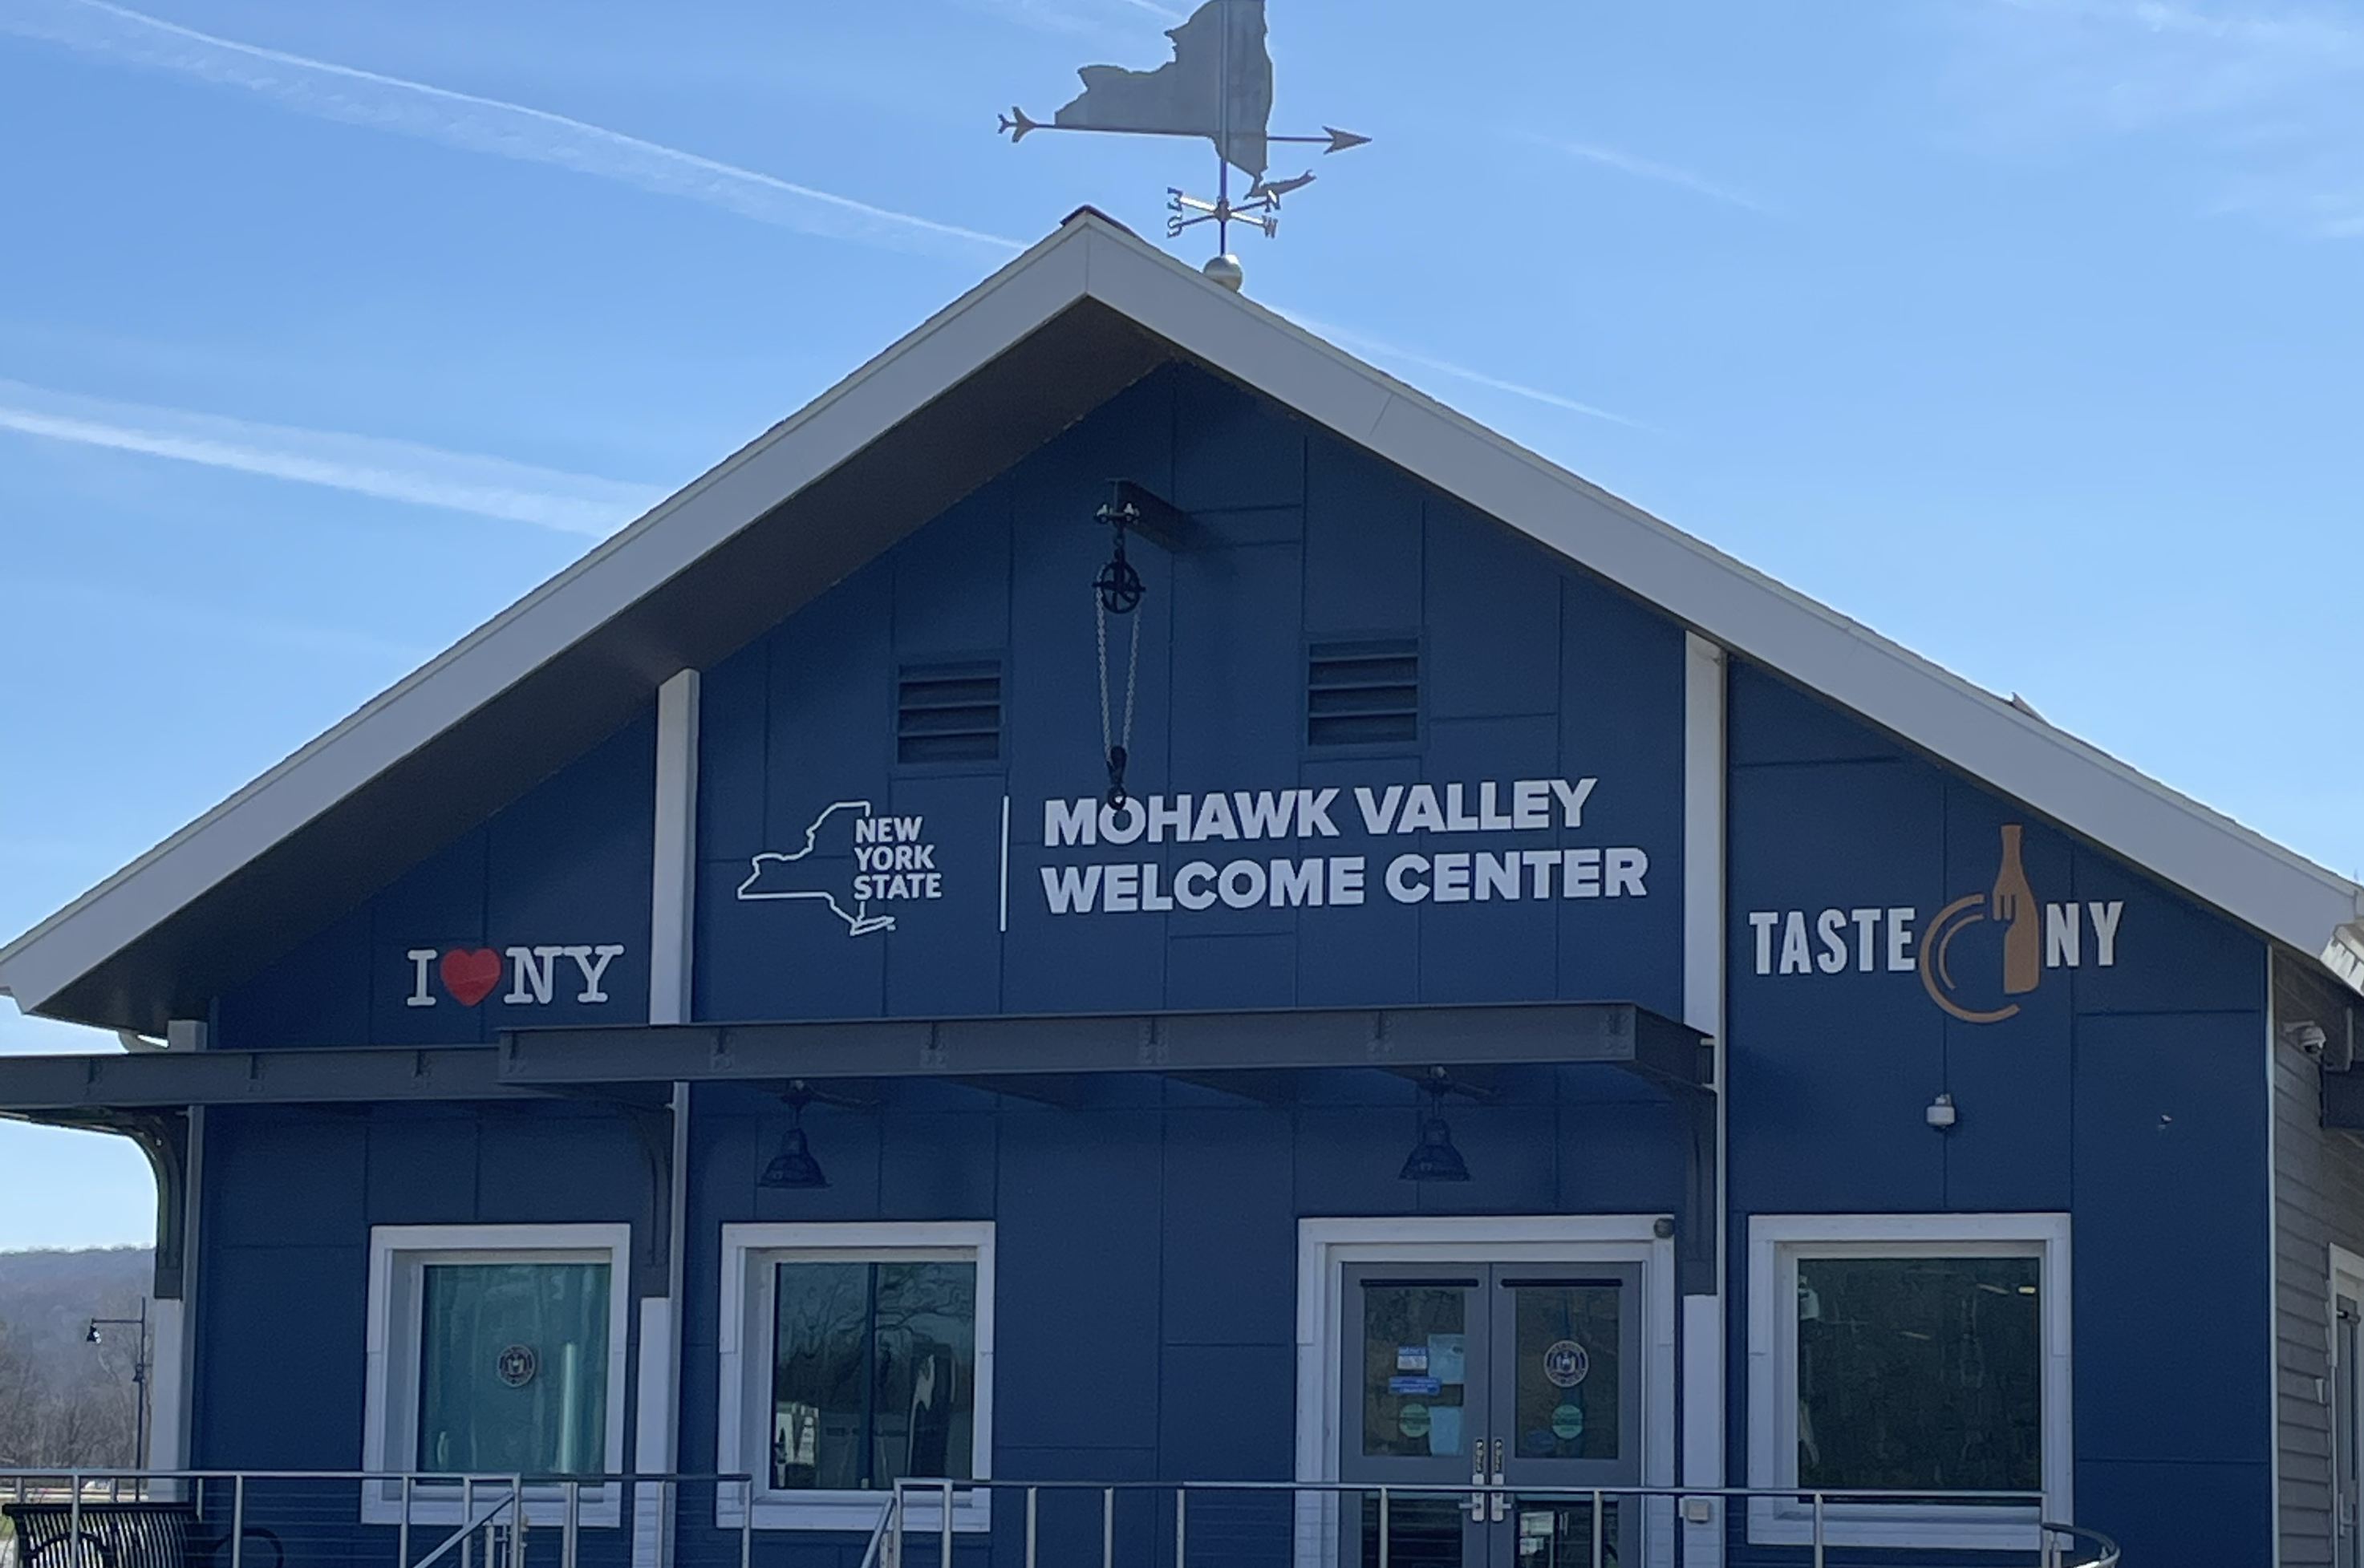 Mohawk Valley Welcome Center